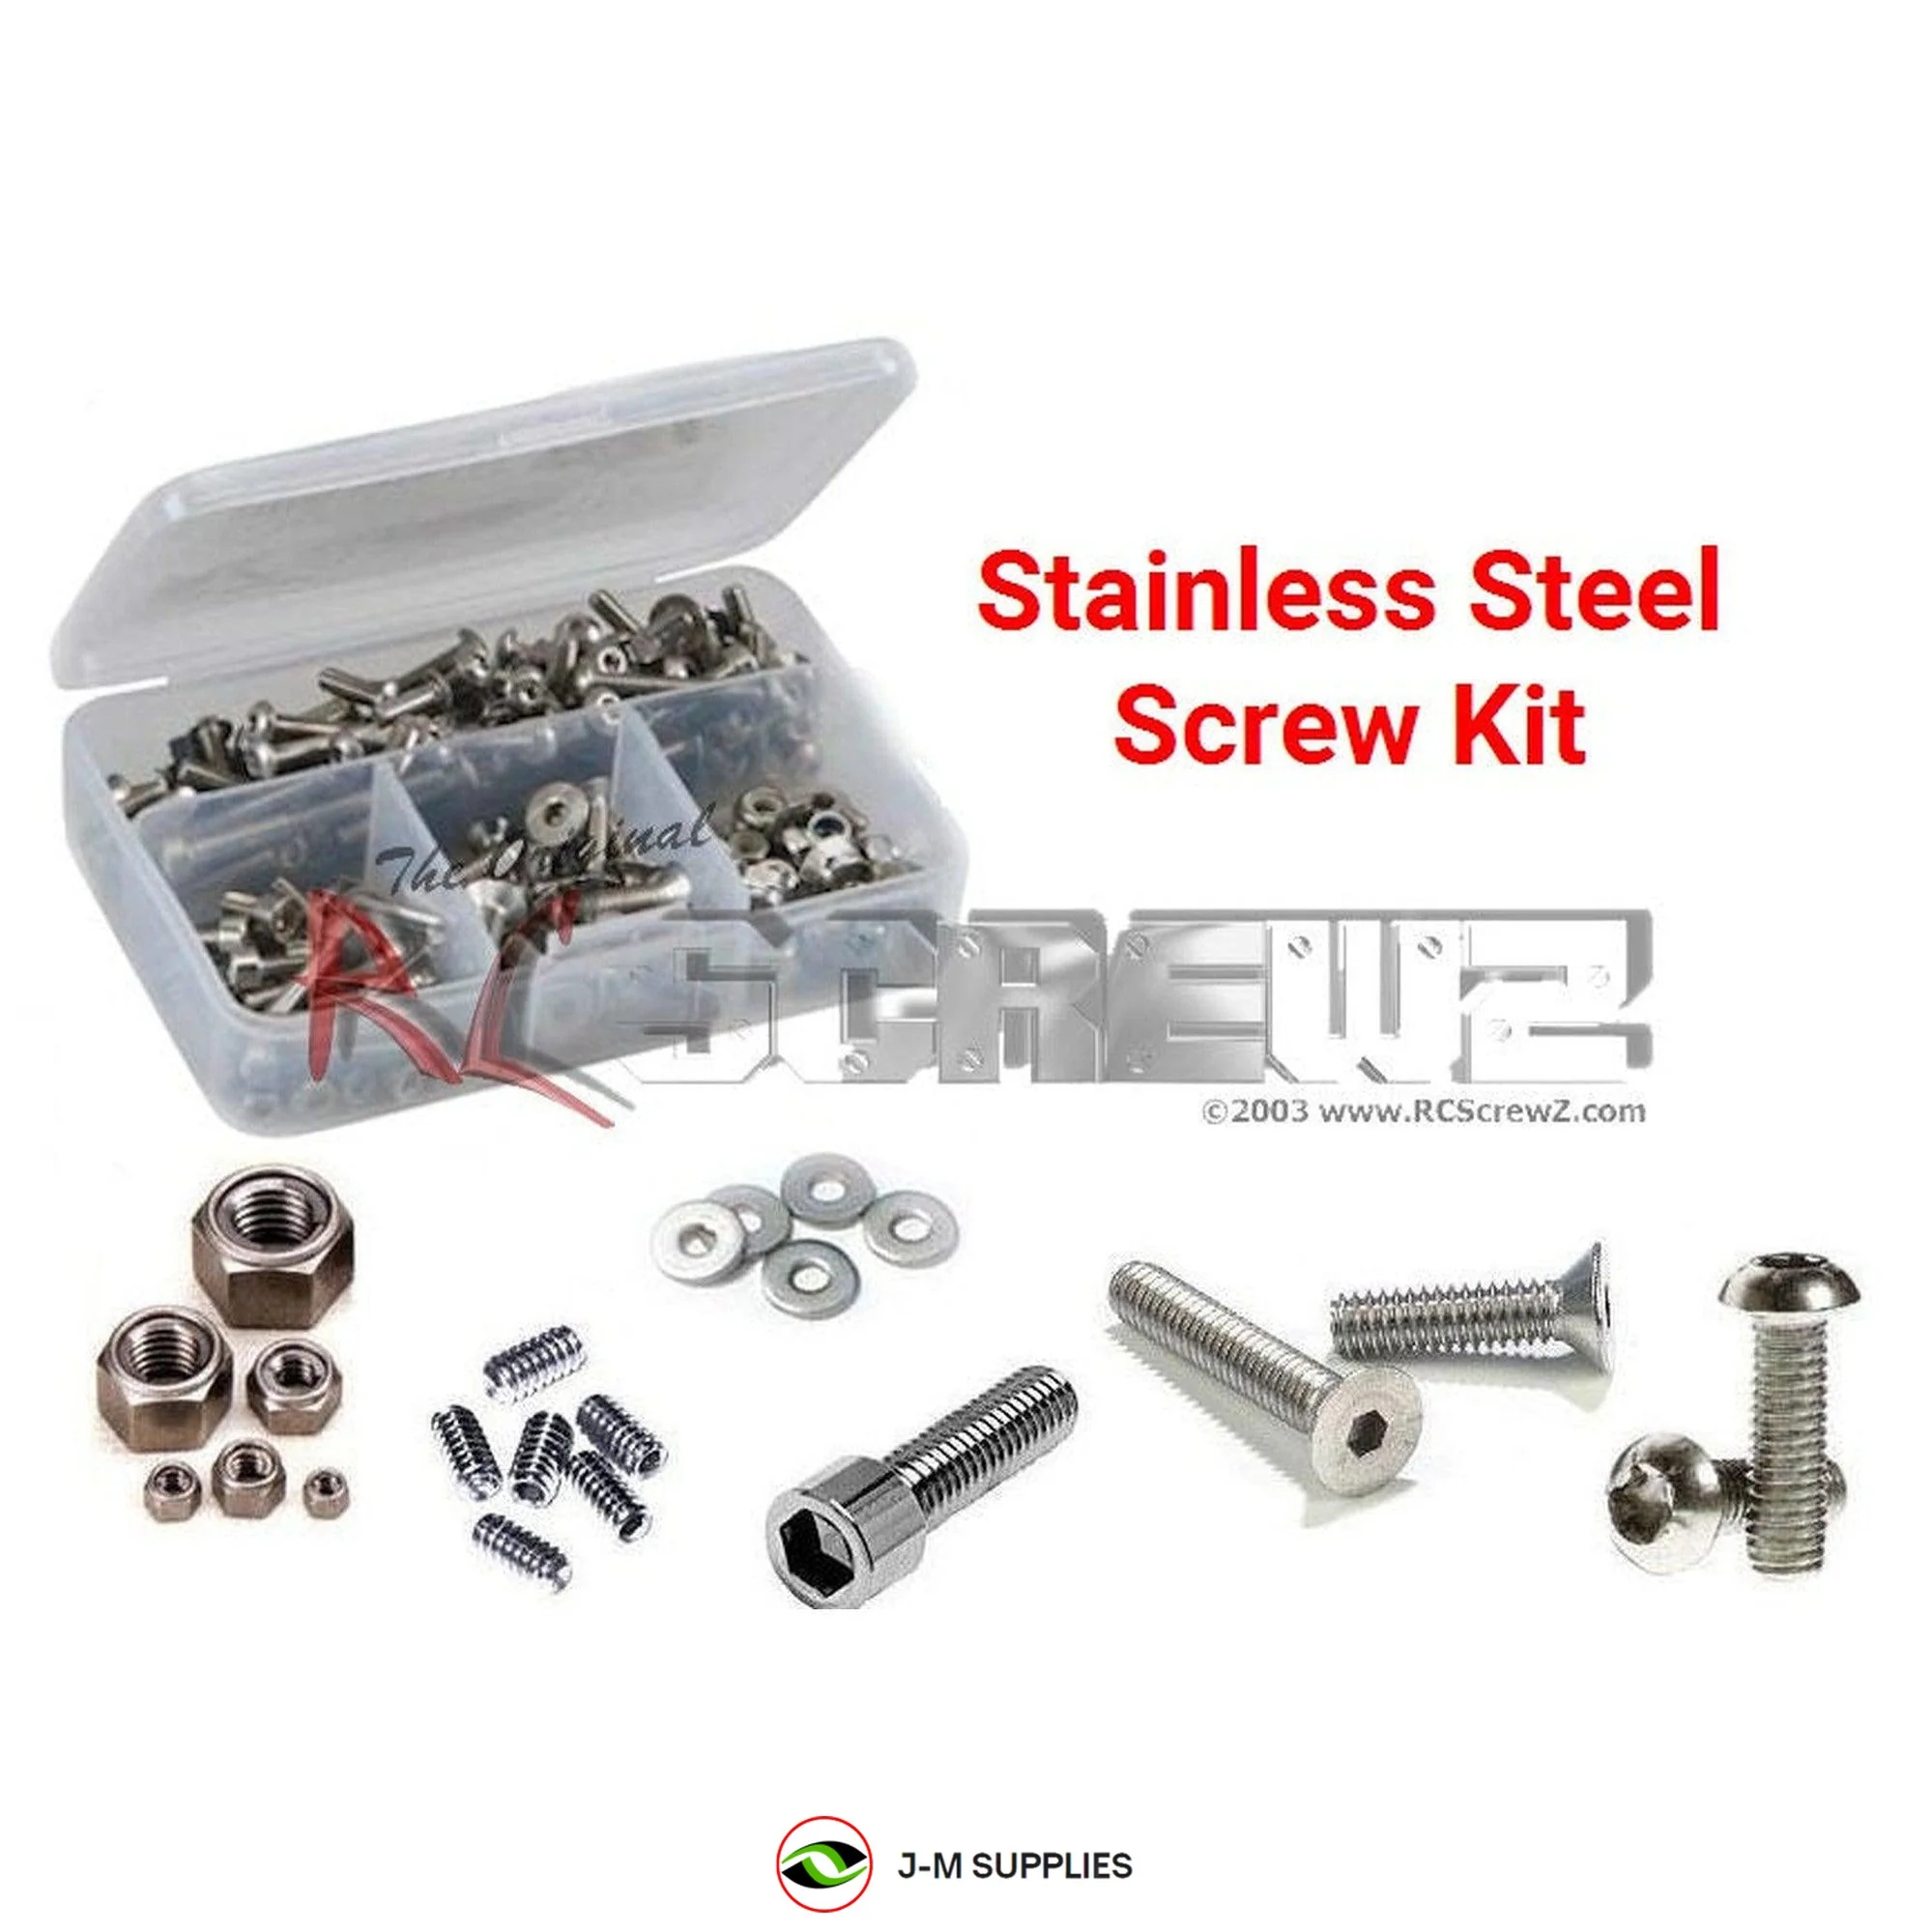 RCScrewZ Stainless Screw Kit ser092 for Serpent Viper 990 Nitro 1/8th 903020 - Picture 1 of 12